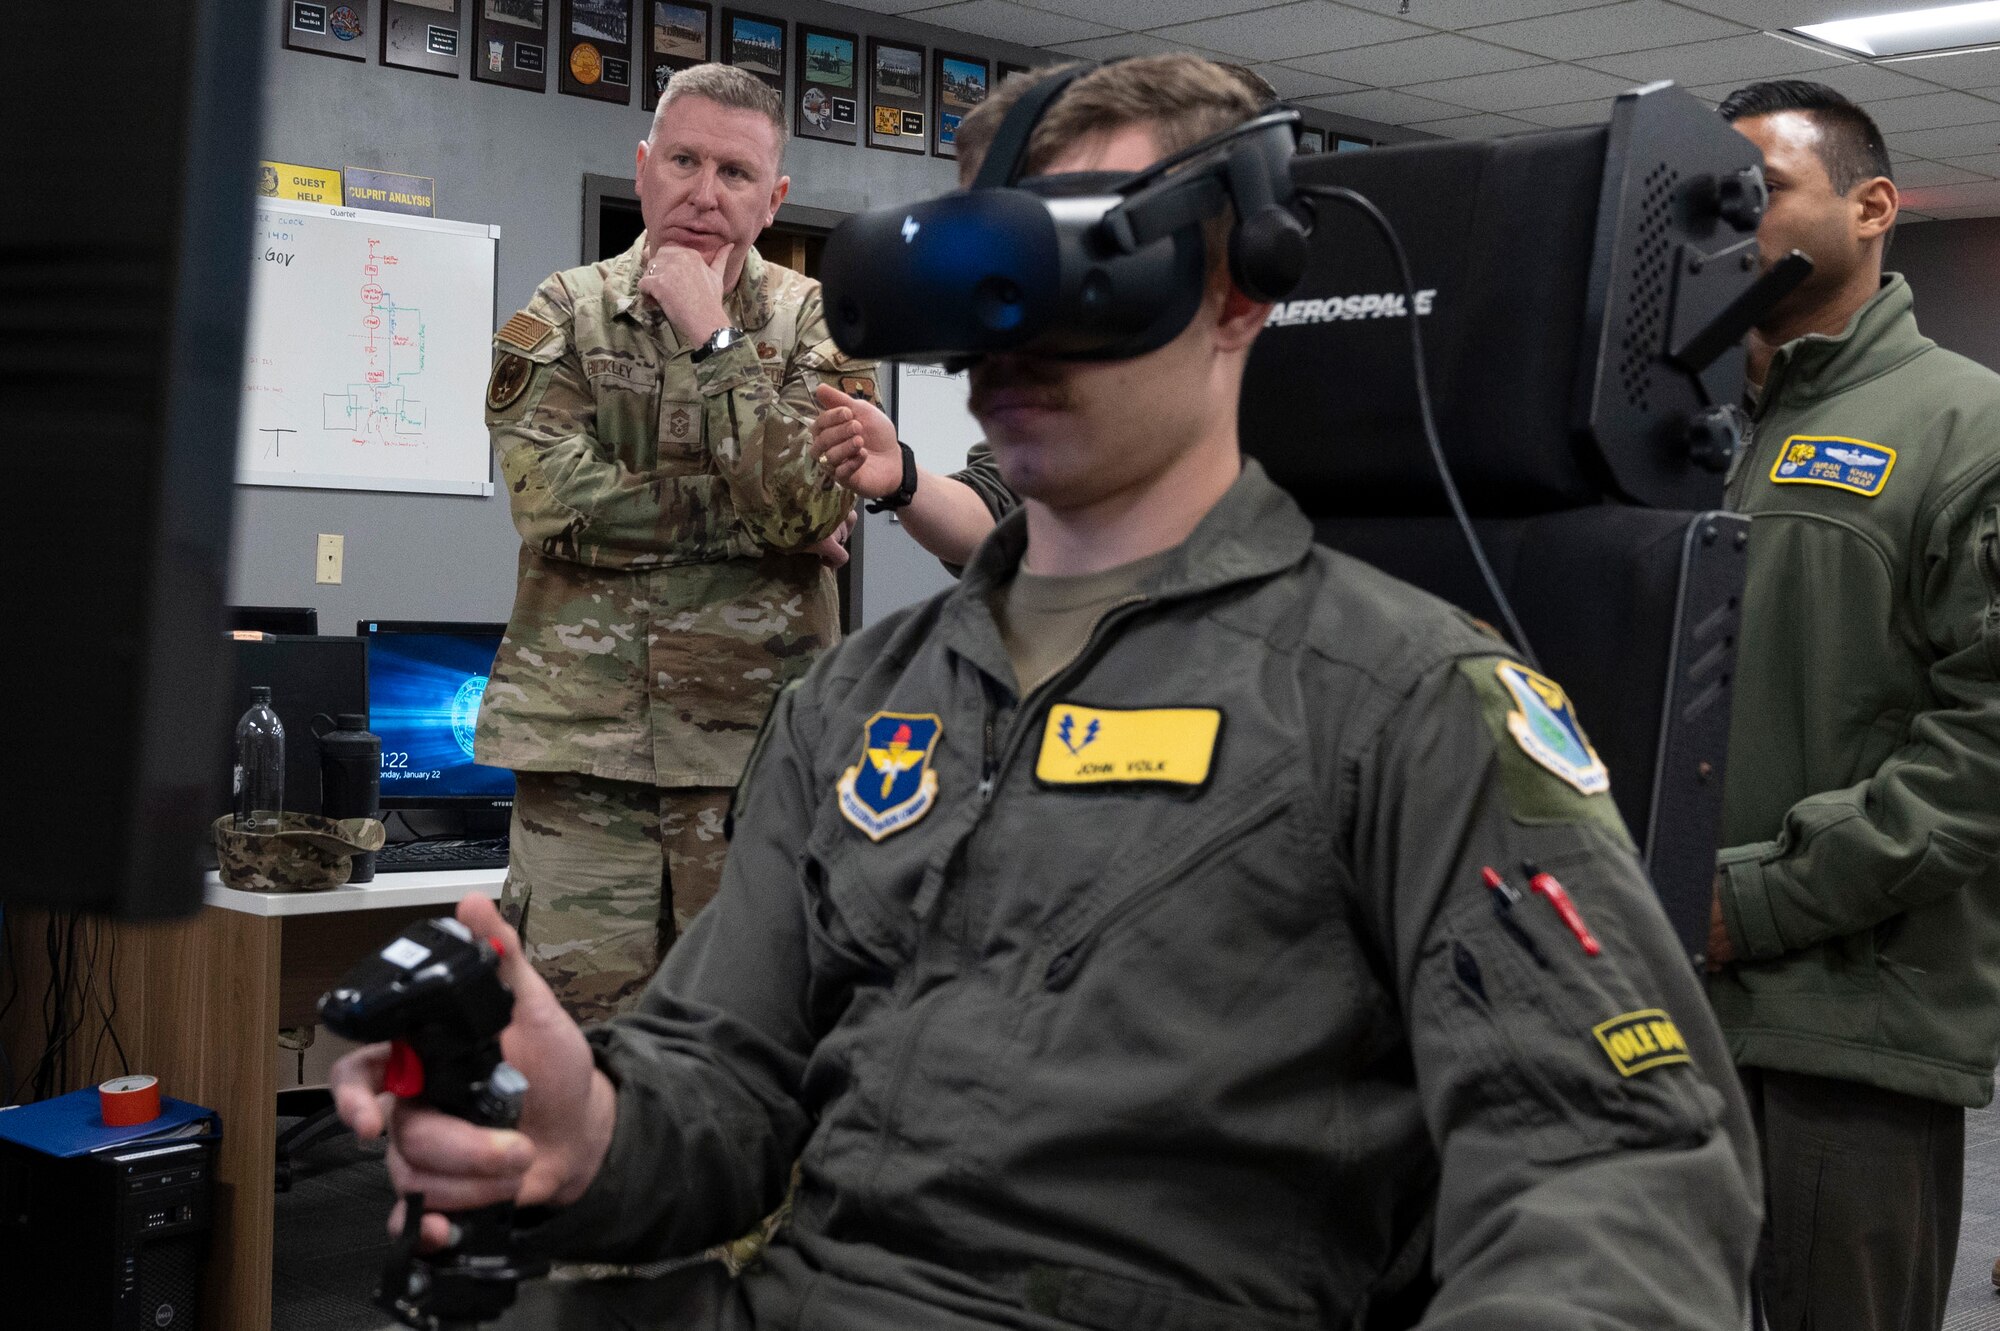 U.S. Air Force Chief Master Sgt. Chad Bickley (left), command chief for Air Education and Training Command, watches as 2nd Lt. John Volk, 47th Student Squadron student pilot, flies a T-6 aircraft simulator inside a 47th Student Squadron classroom at Laughlin Air Force Base, Texas, Jan. 22, 2024. Bickley spent time with Team XL members to get a first-hand glimpse at how Laughlin’s Airmen train student pilots to be the Air Force’s newest and most lethal pilots. (U.S. Air Force photo by Senior Airman Kailee Reynolds)